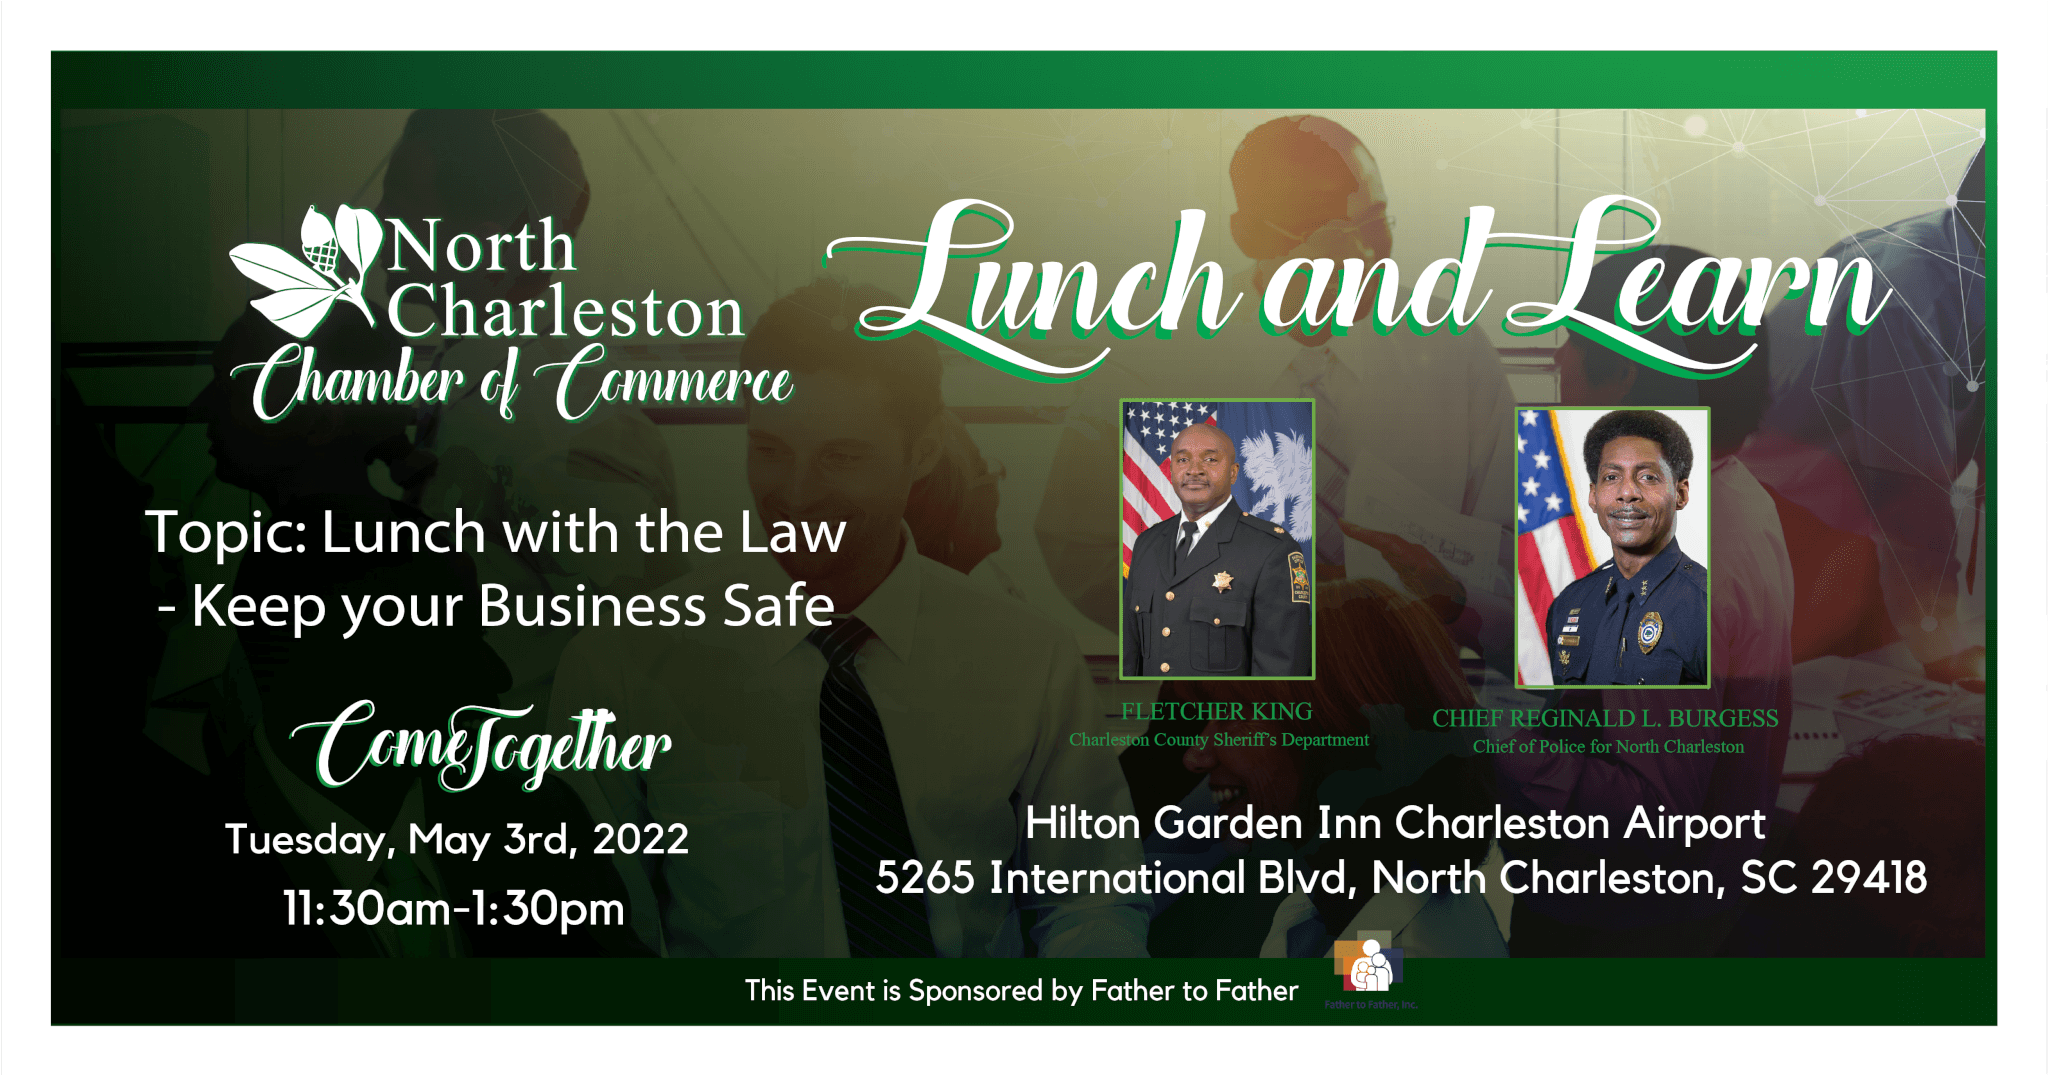 May 2022 Lunch & Learn with Major Fletcher King and Chief Reggie Burgess sponsored by Father to Father @ Hilton Garden Inn